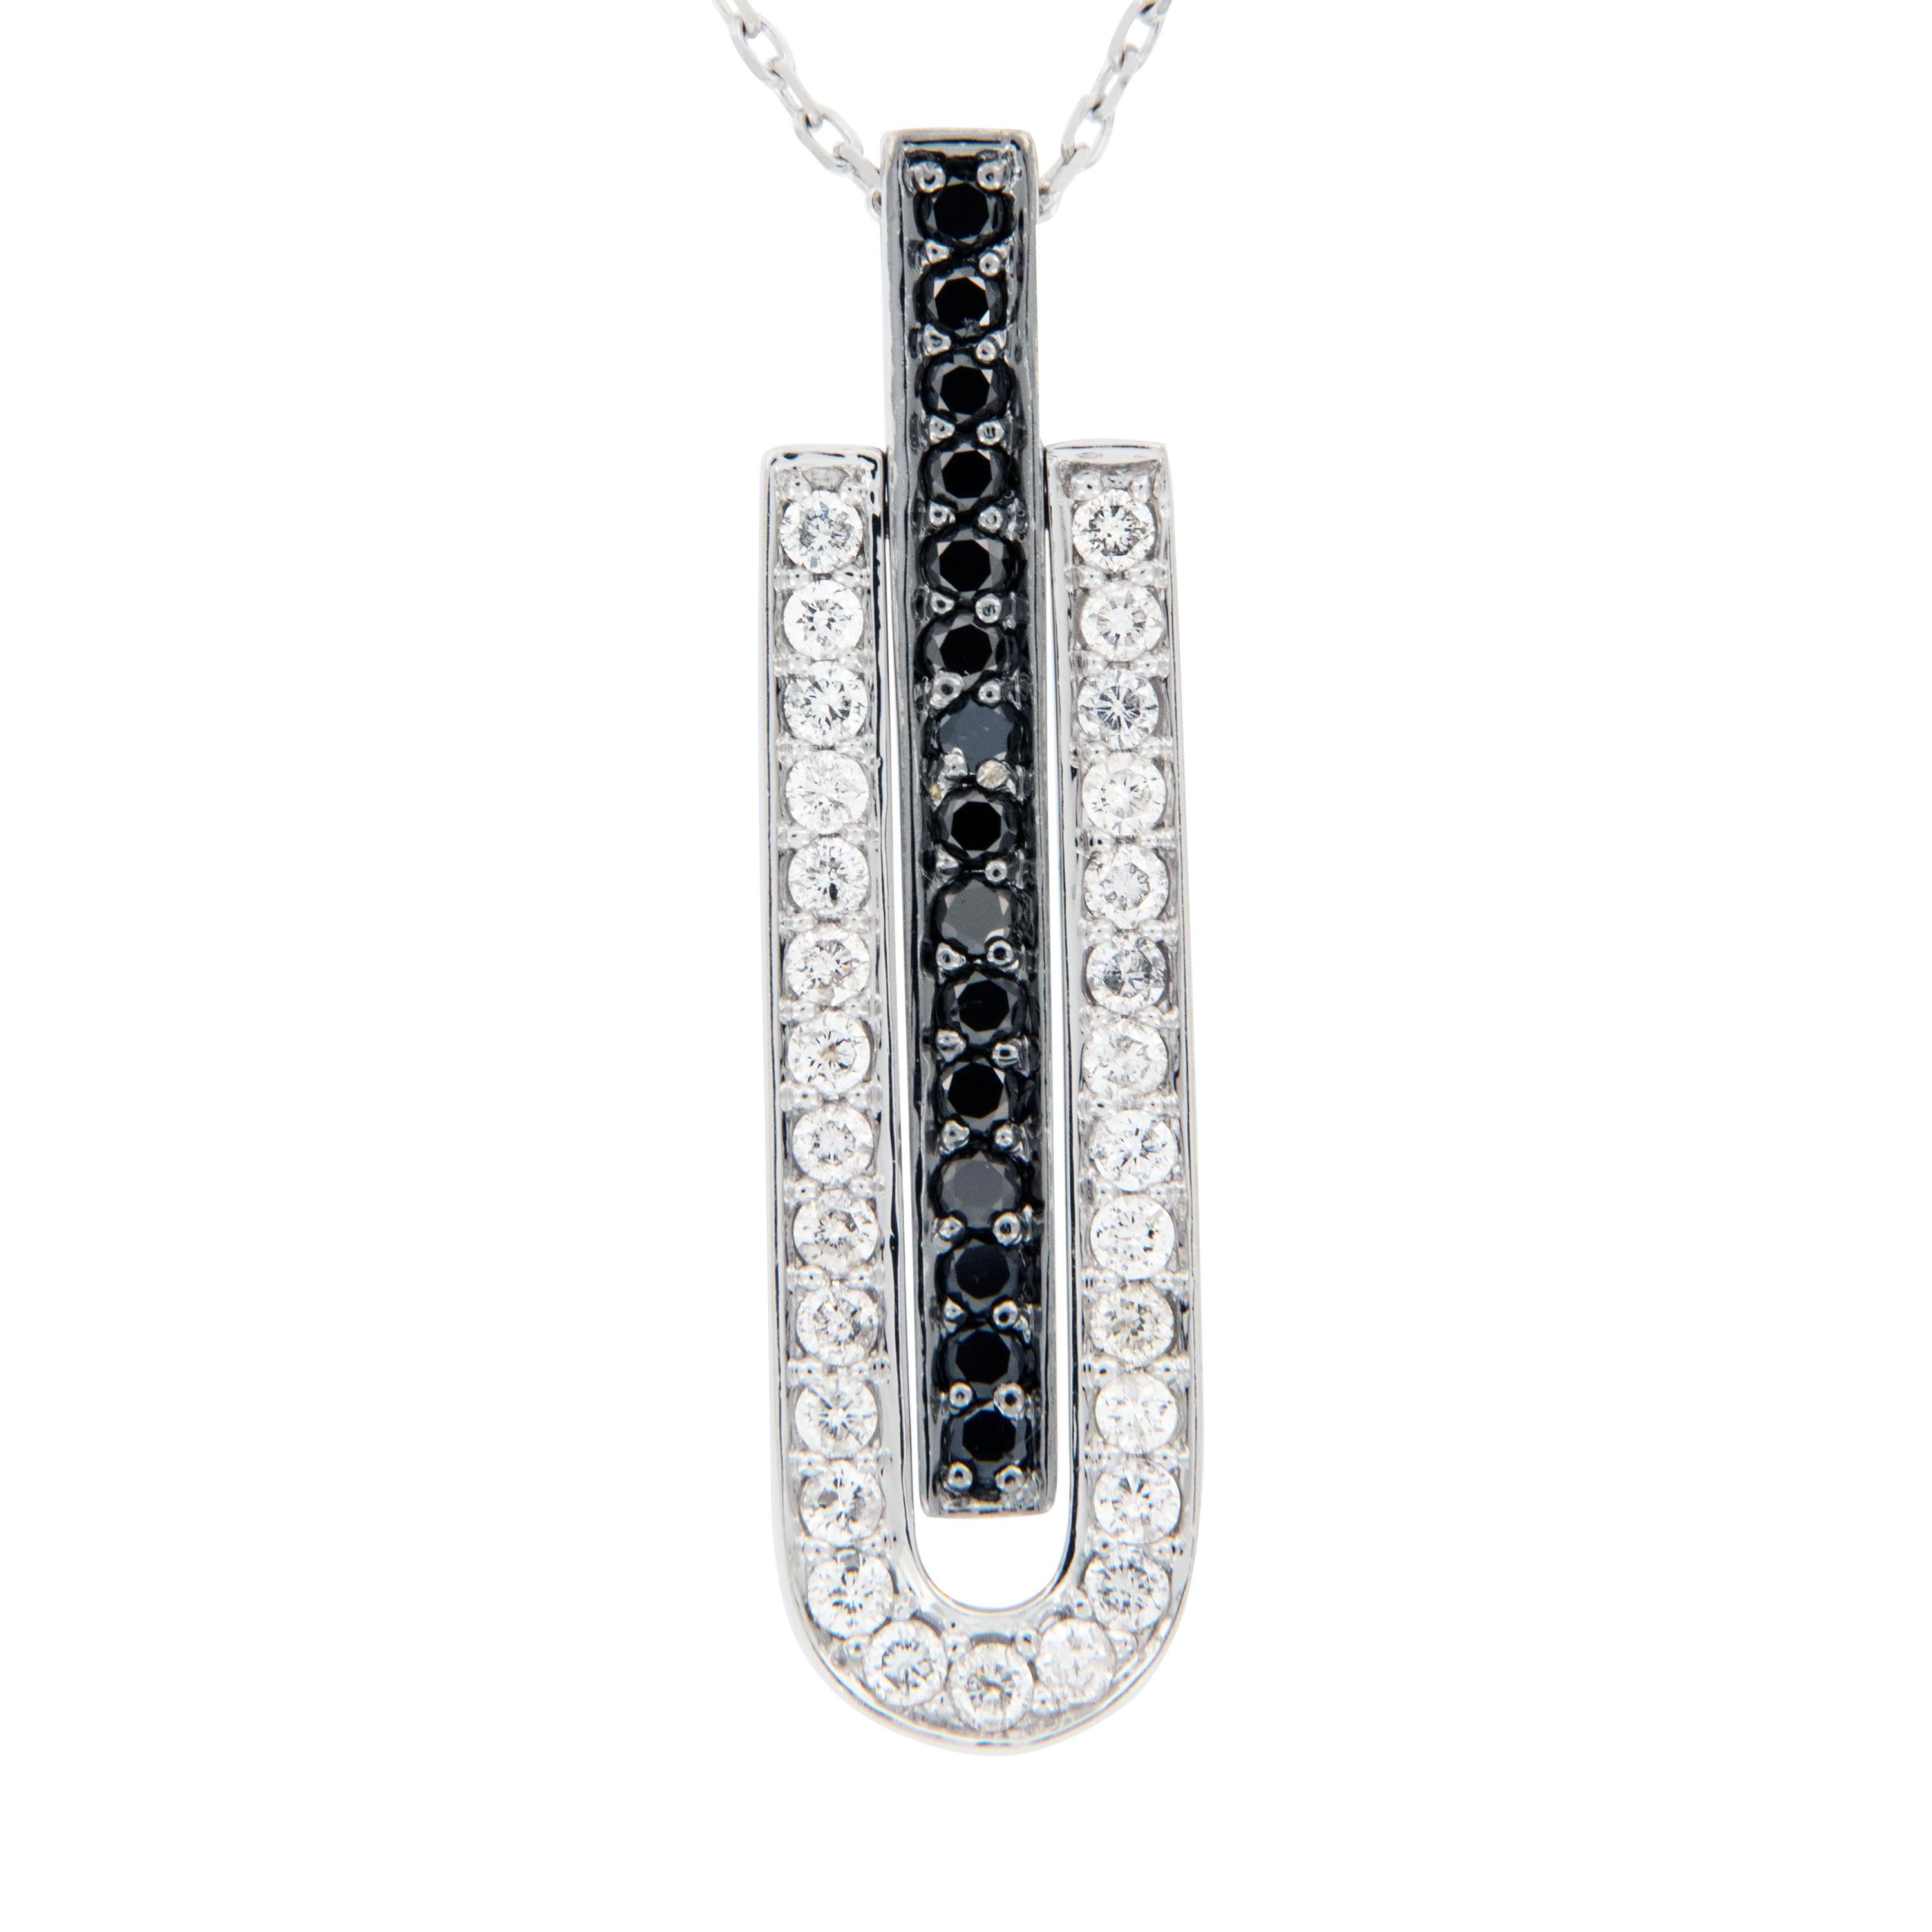 Black & white goes with everything! This unique piece looks fantastic all dressed up for a black tie event as well as it does for less formal ones. It is hinged with the center section set with black diamonds moving freely from the outer white